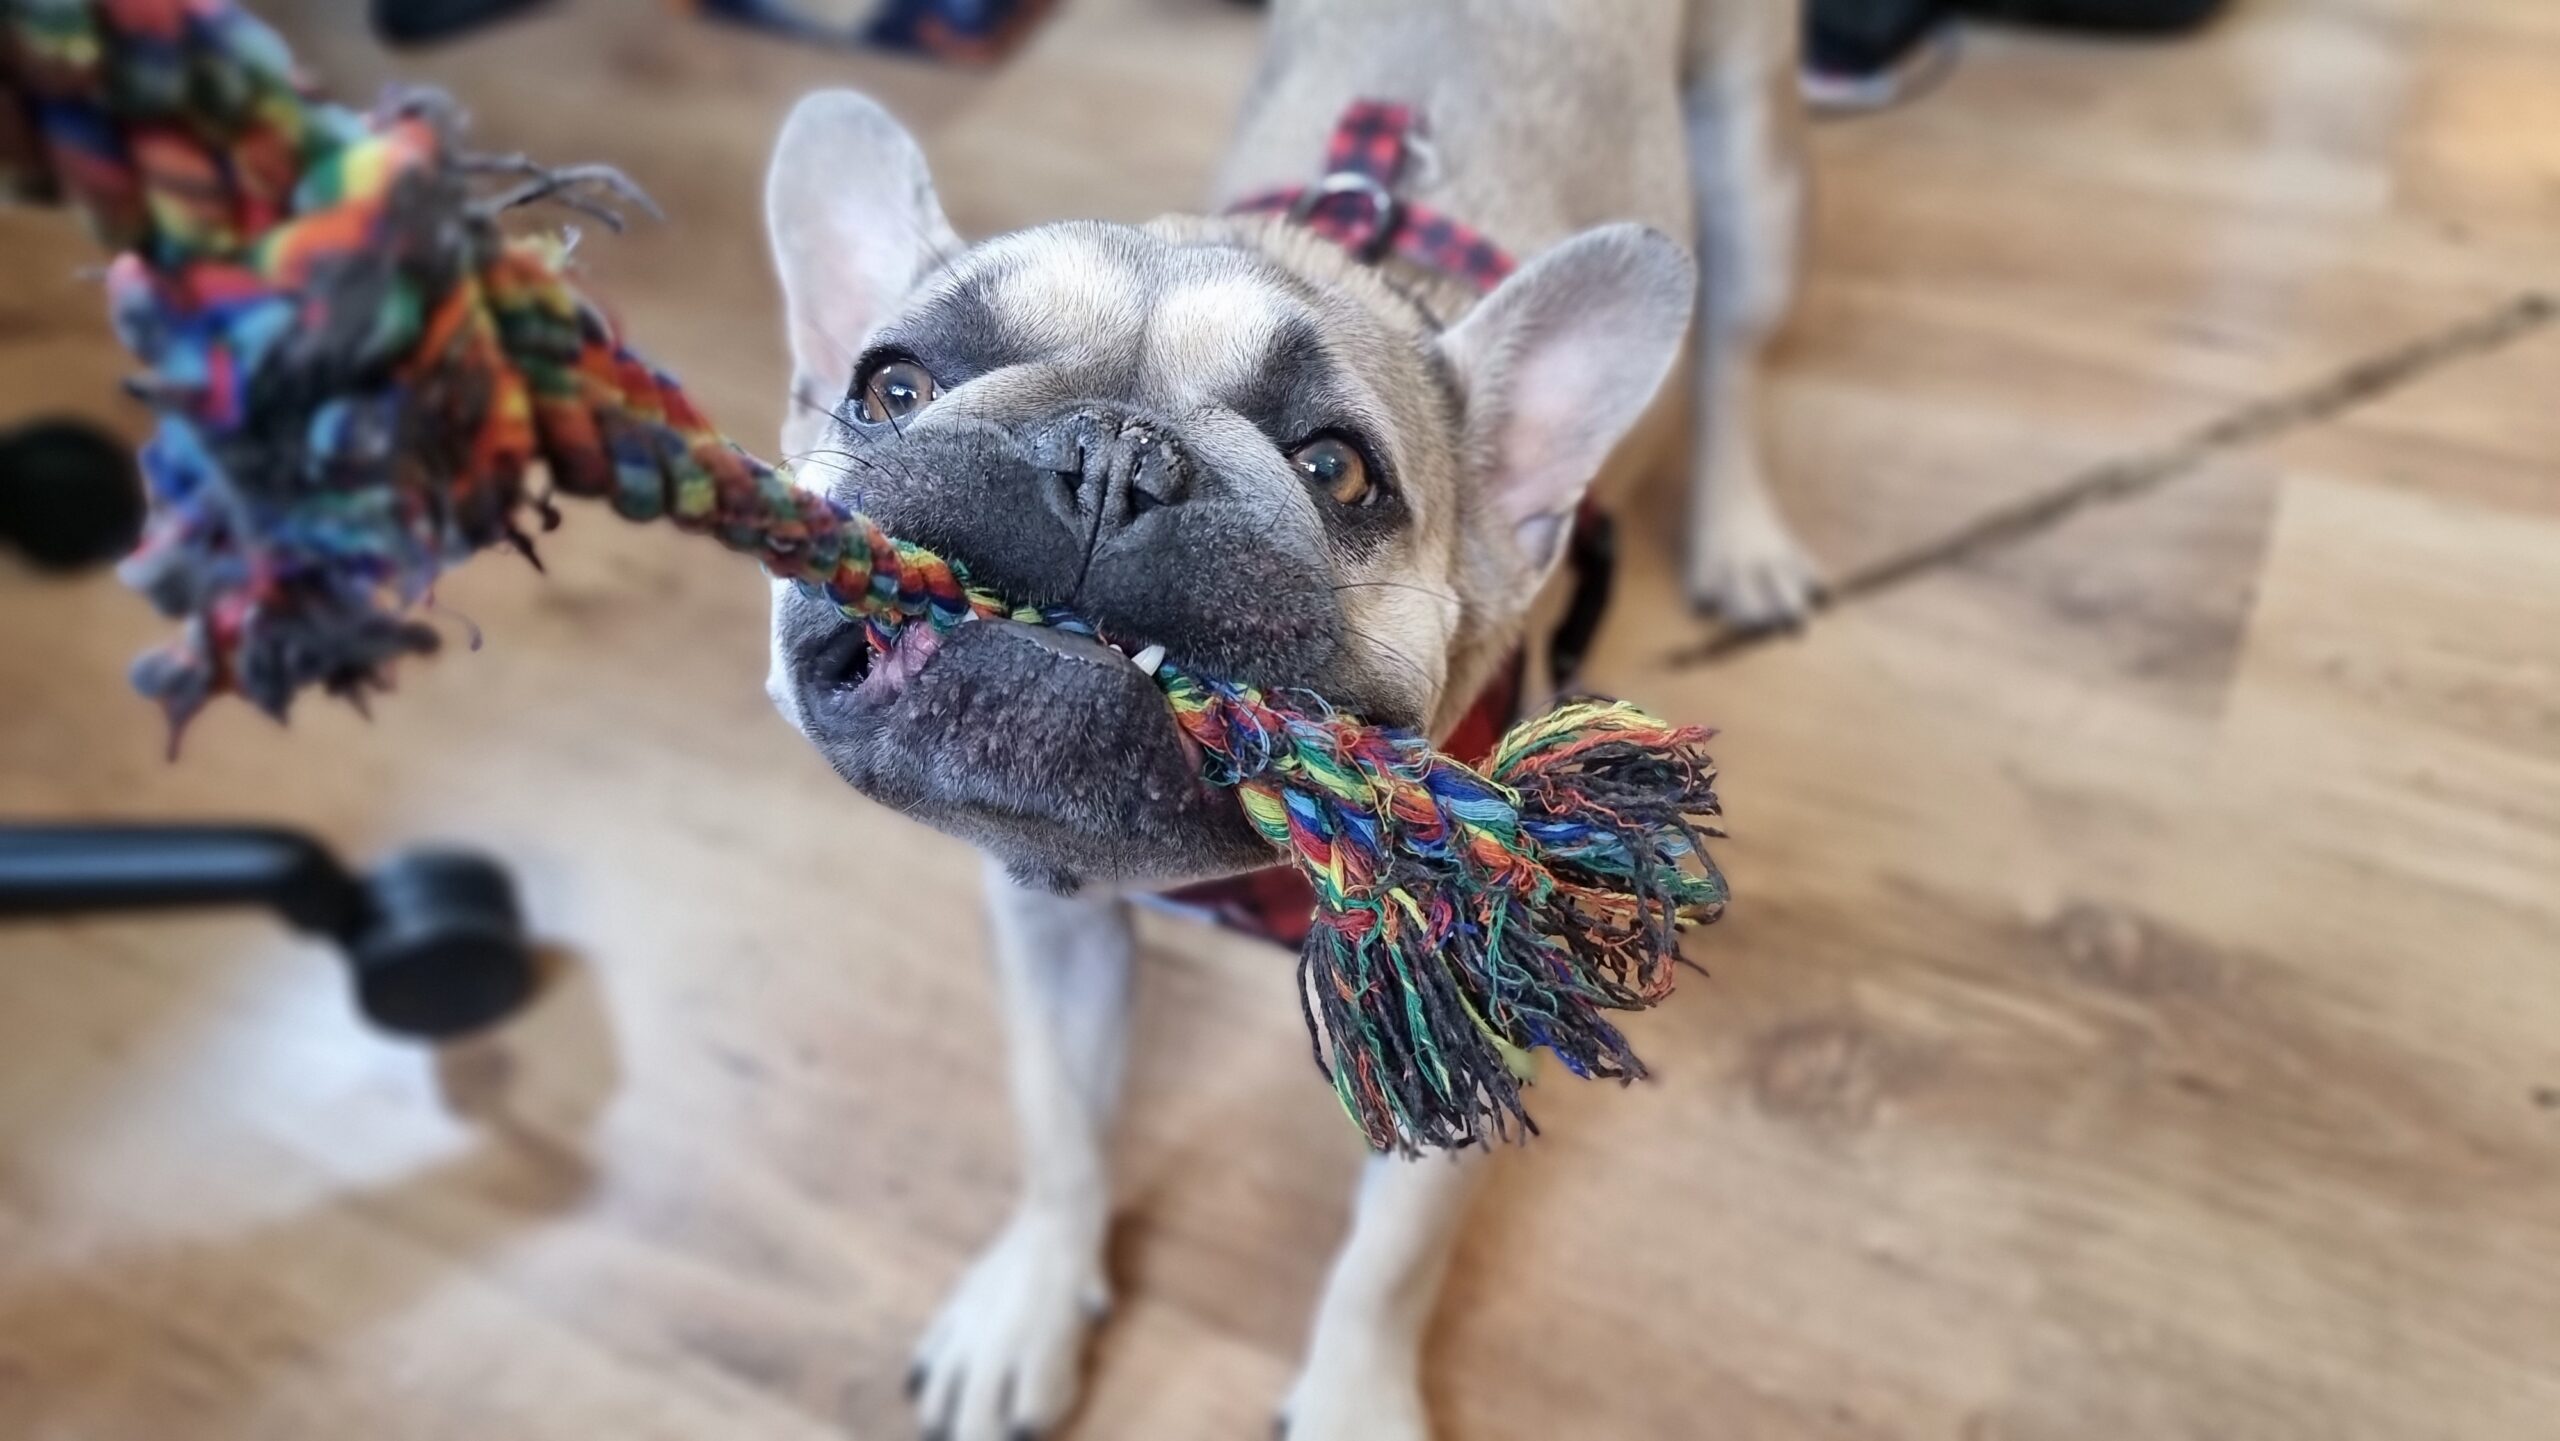 Photograph of a French Bulldog on a wooden floor playing tug-of-war using a multicoloured plaited rope (the human holding the other end of the rope is behind the camera).